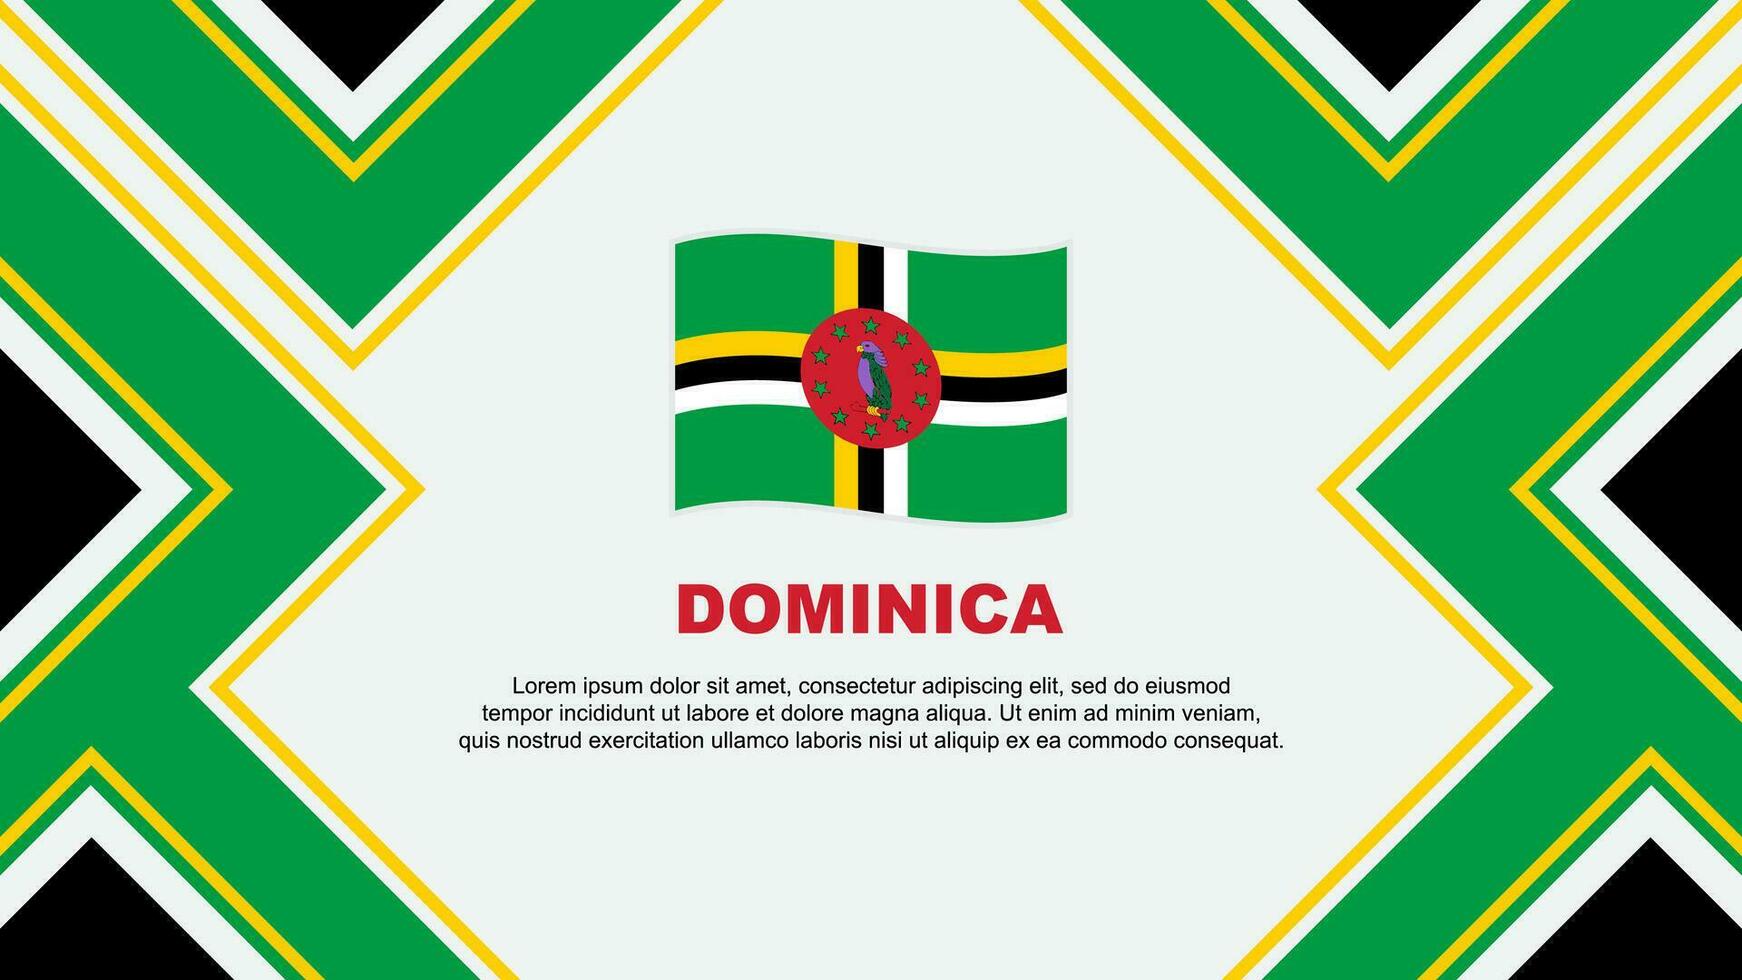 Dominica Flag Abstract Background Design Template. Dominica Independence Day Banner Wallpaper Vector Illustration. Dominica Vector